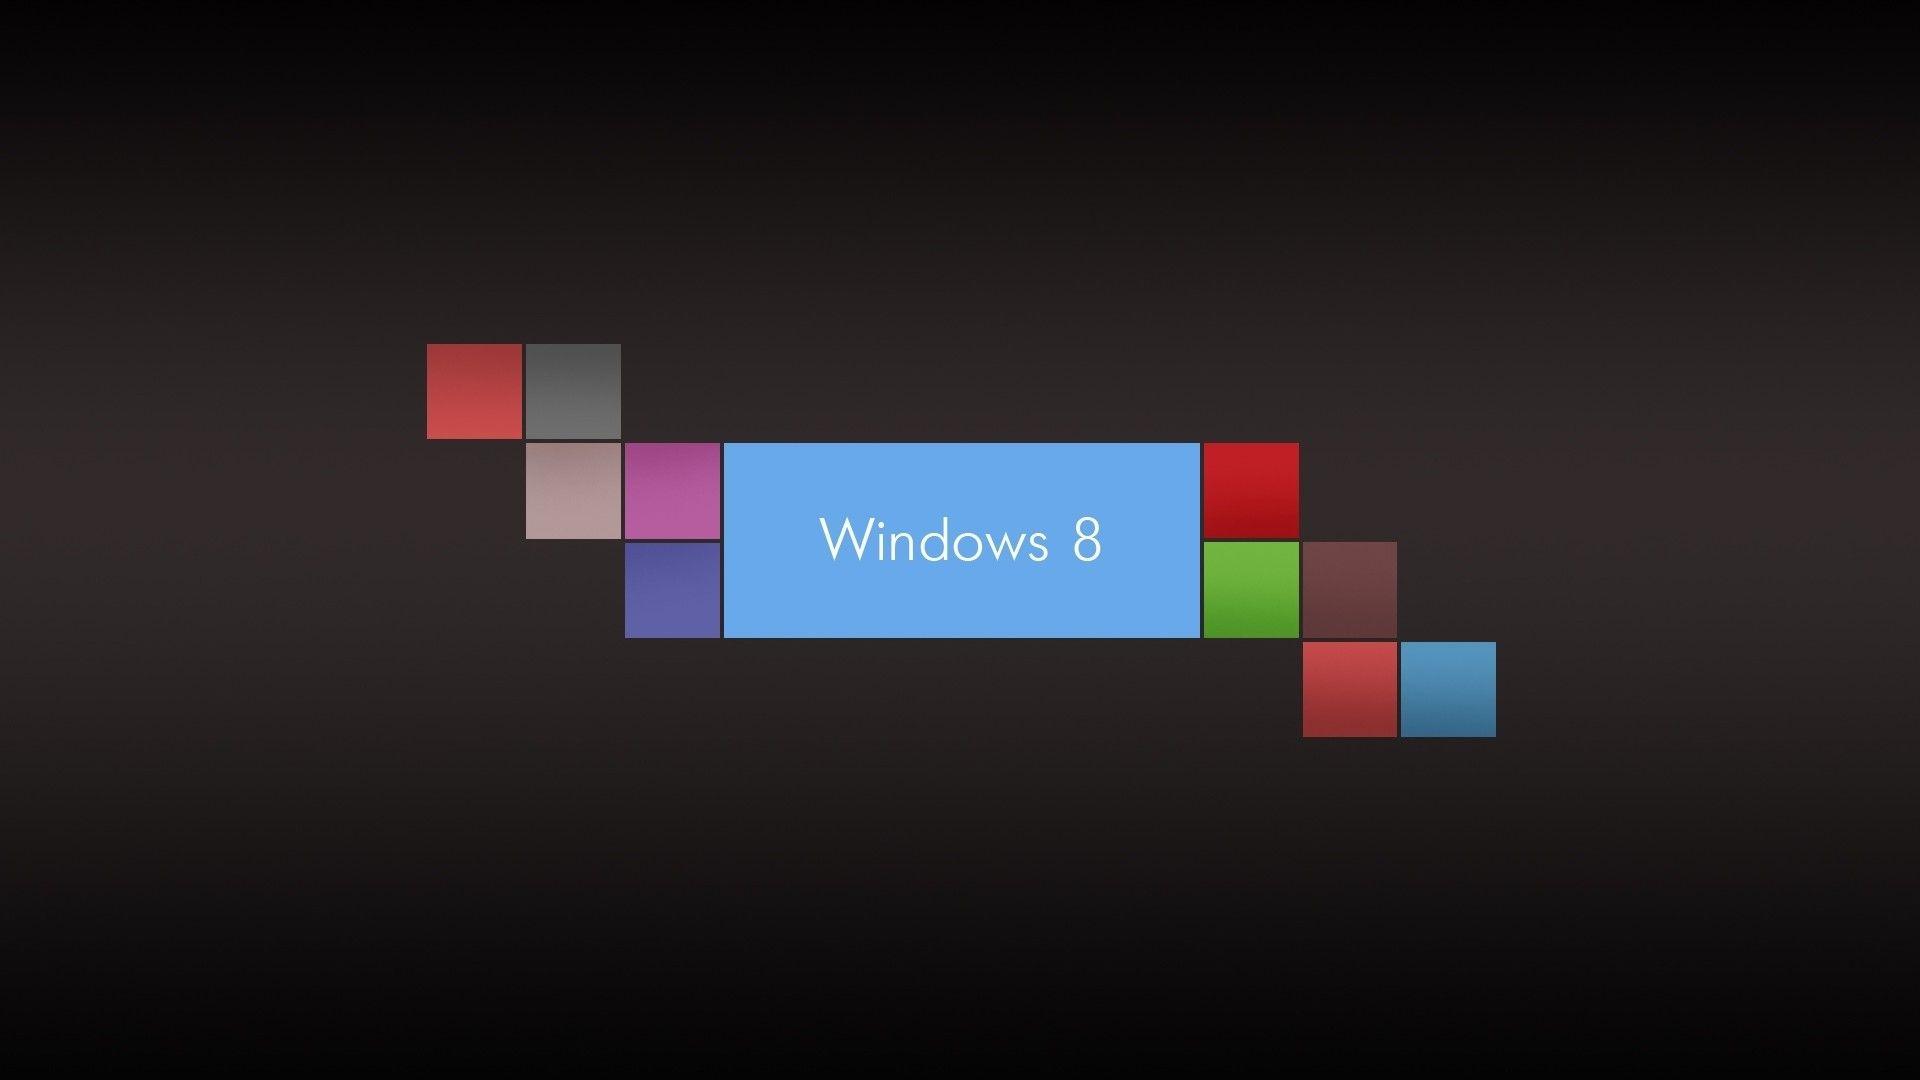 Windows 8 Logo Wallpapers For PC Hd 1080P 11 HD Wallpapers